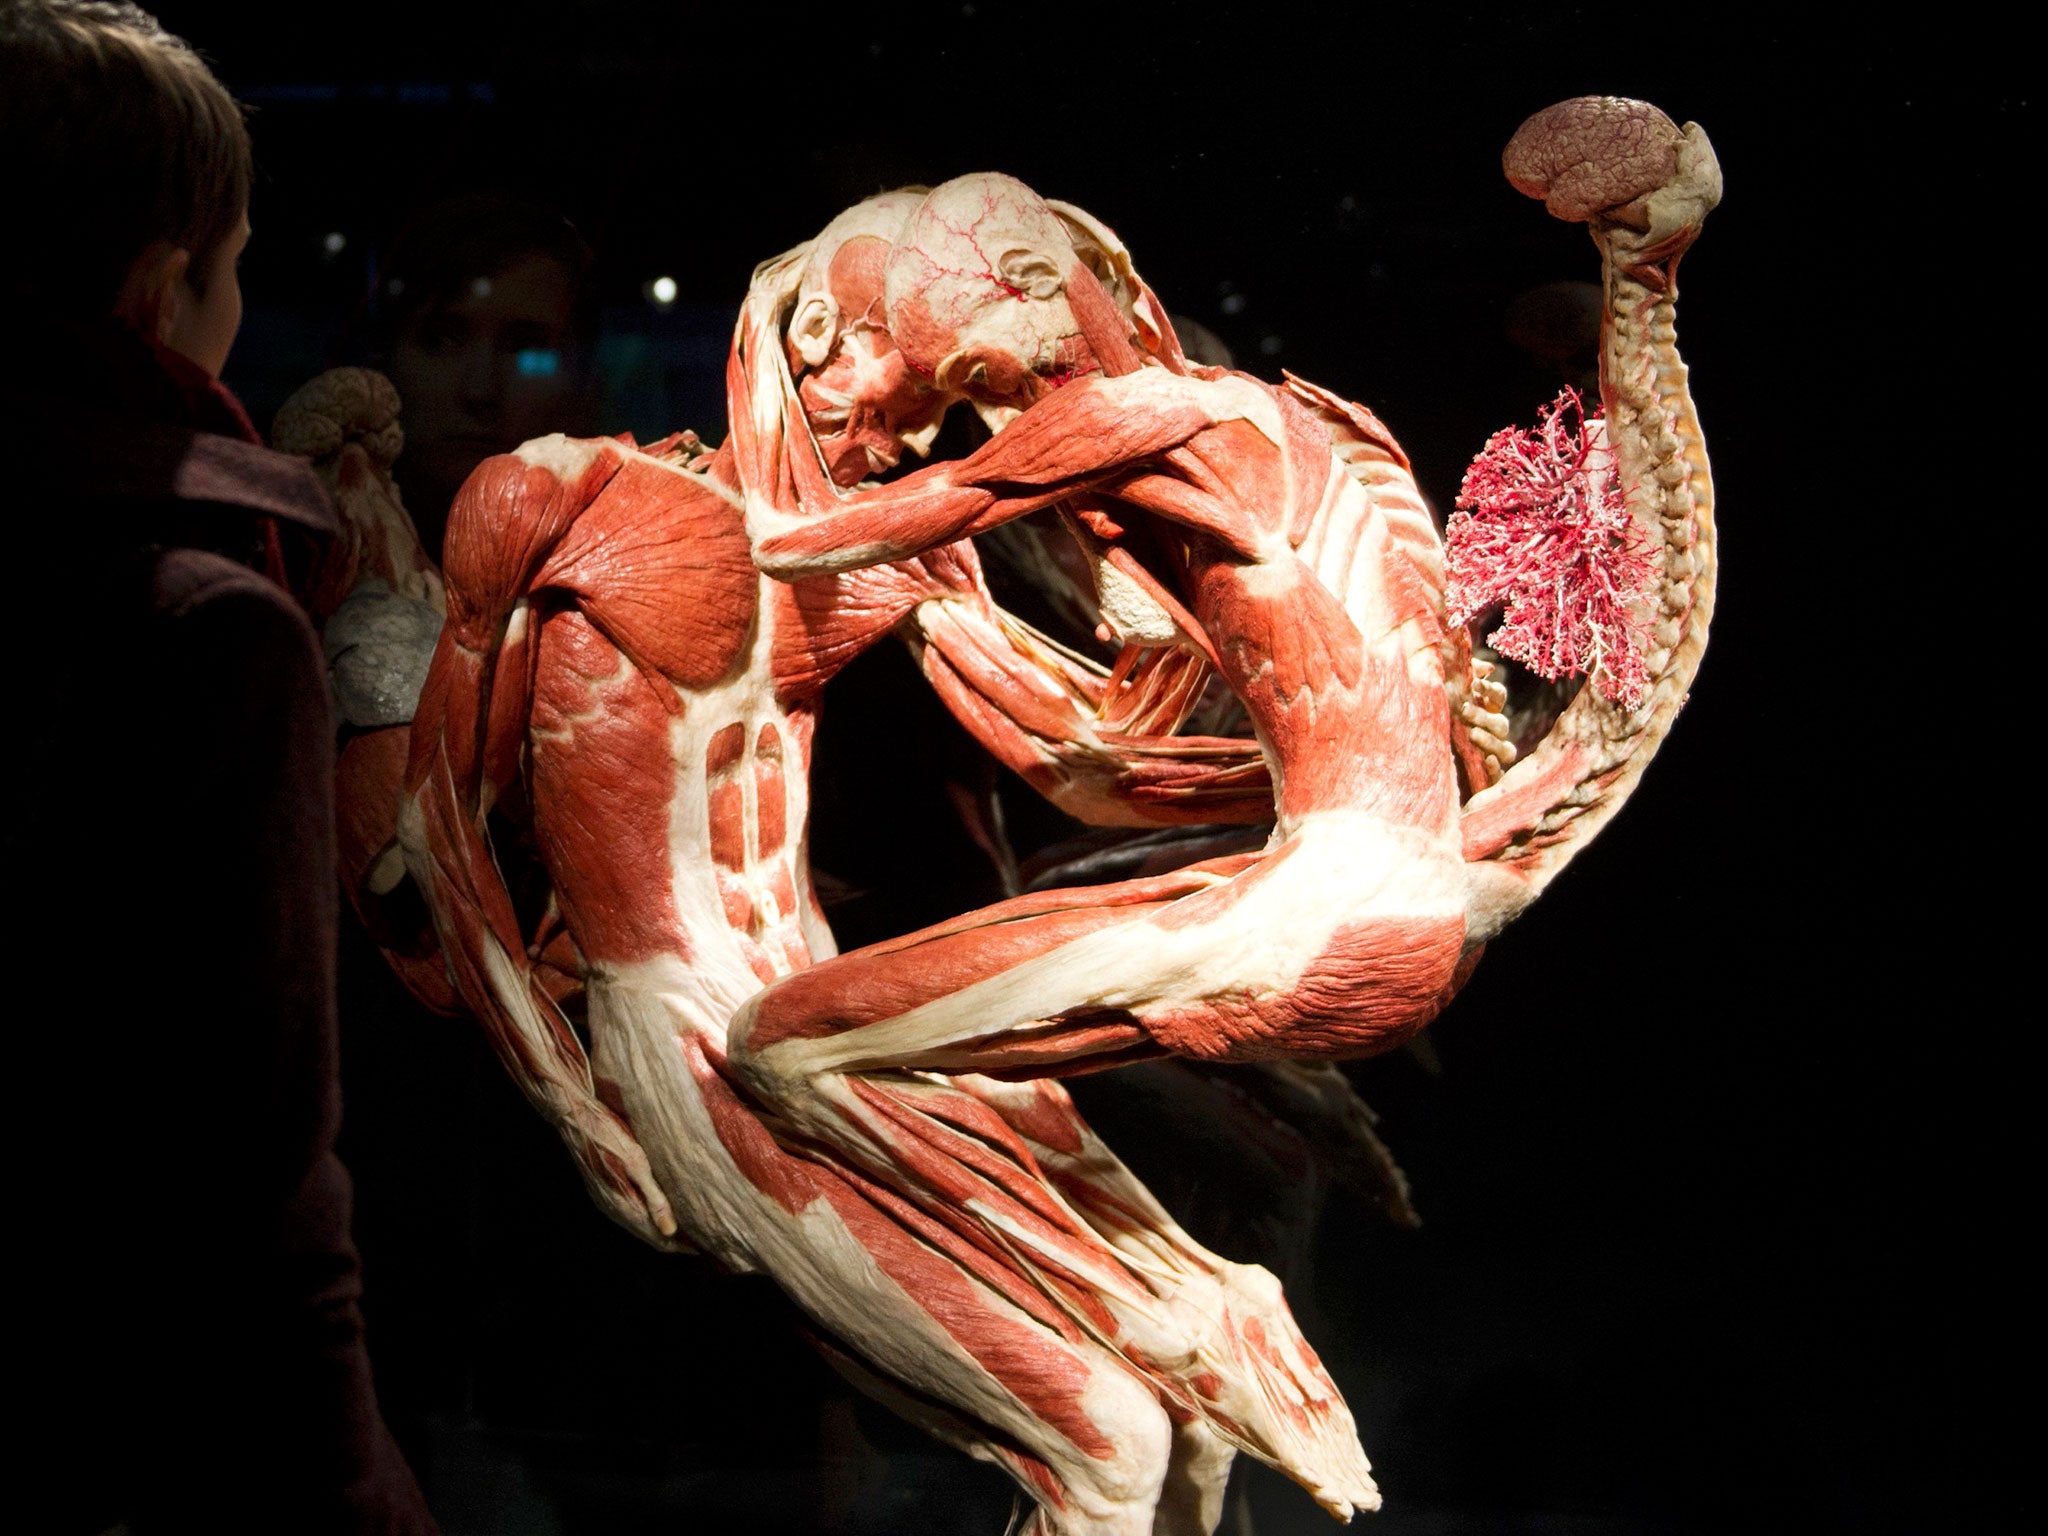 A visitor looks at plastinated human bodies prior to the opening of "Body Worlds" permanent exhibition by German anatomist Gunther von Hagens at the Menschen Musem in Berlin. The controversial permanent exhibition of more than 200 unique plastinates, bodi